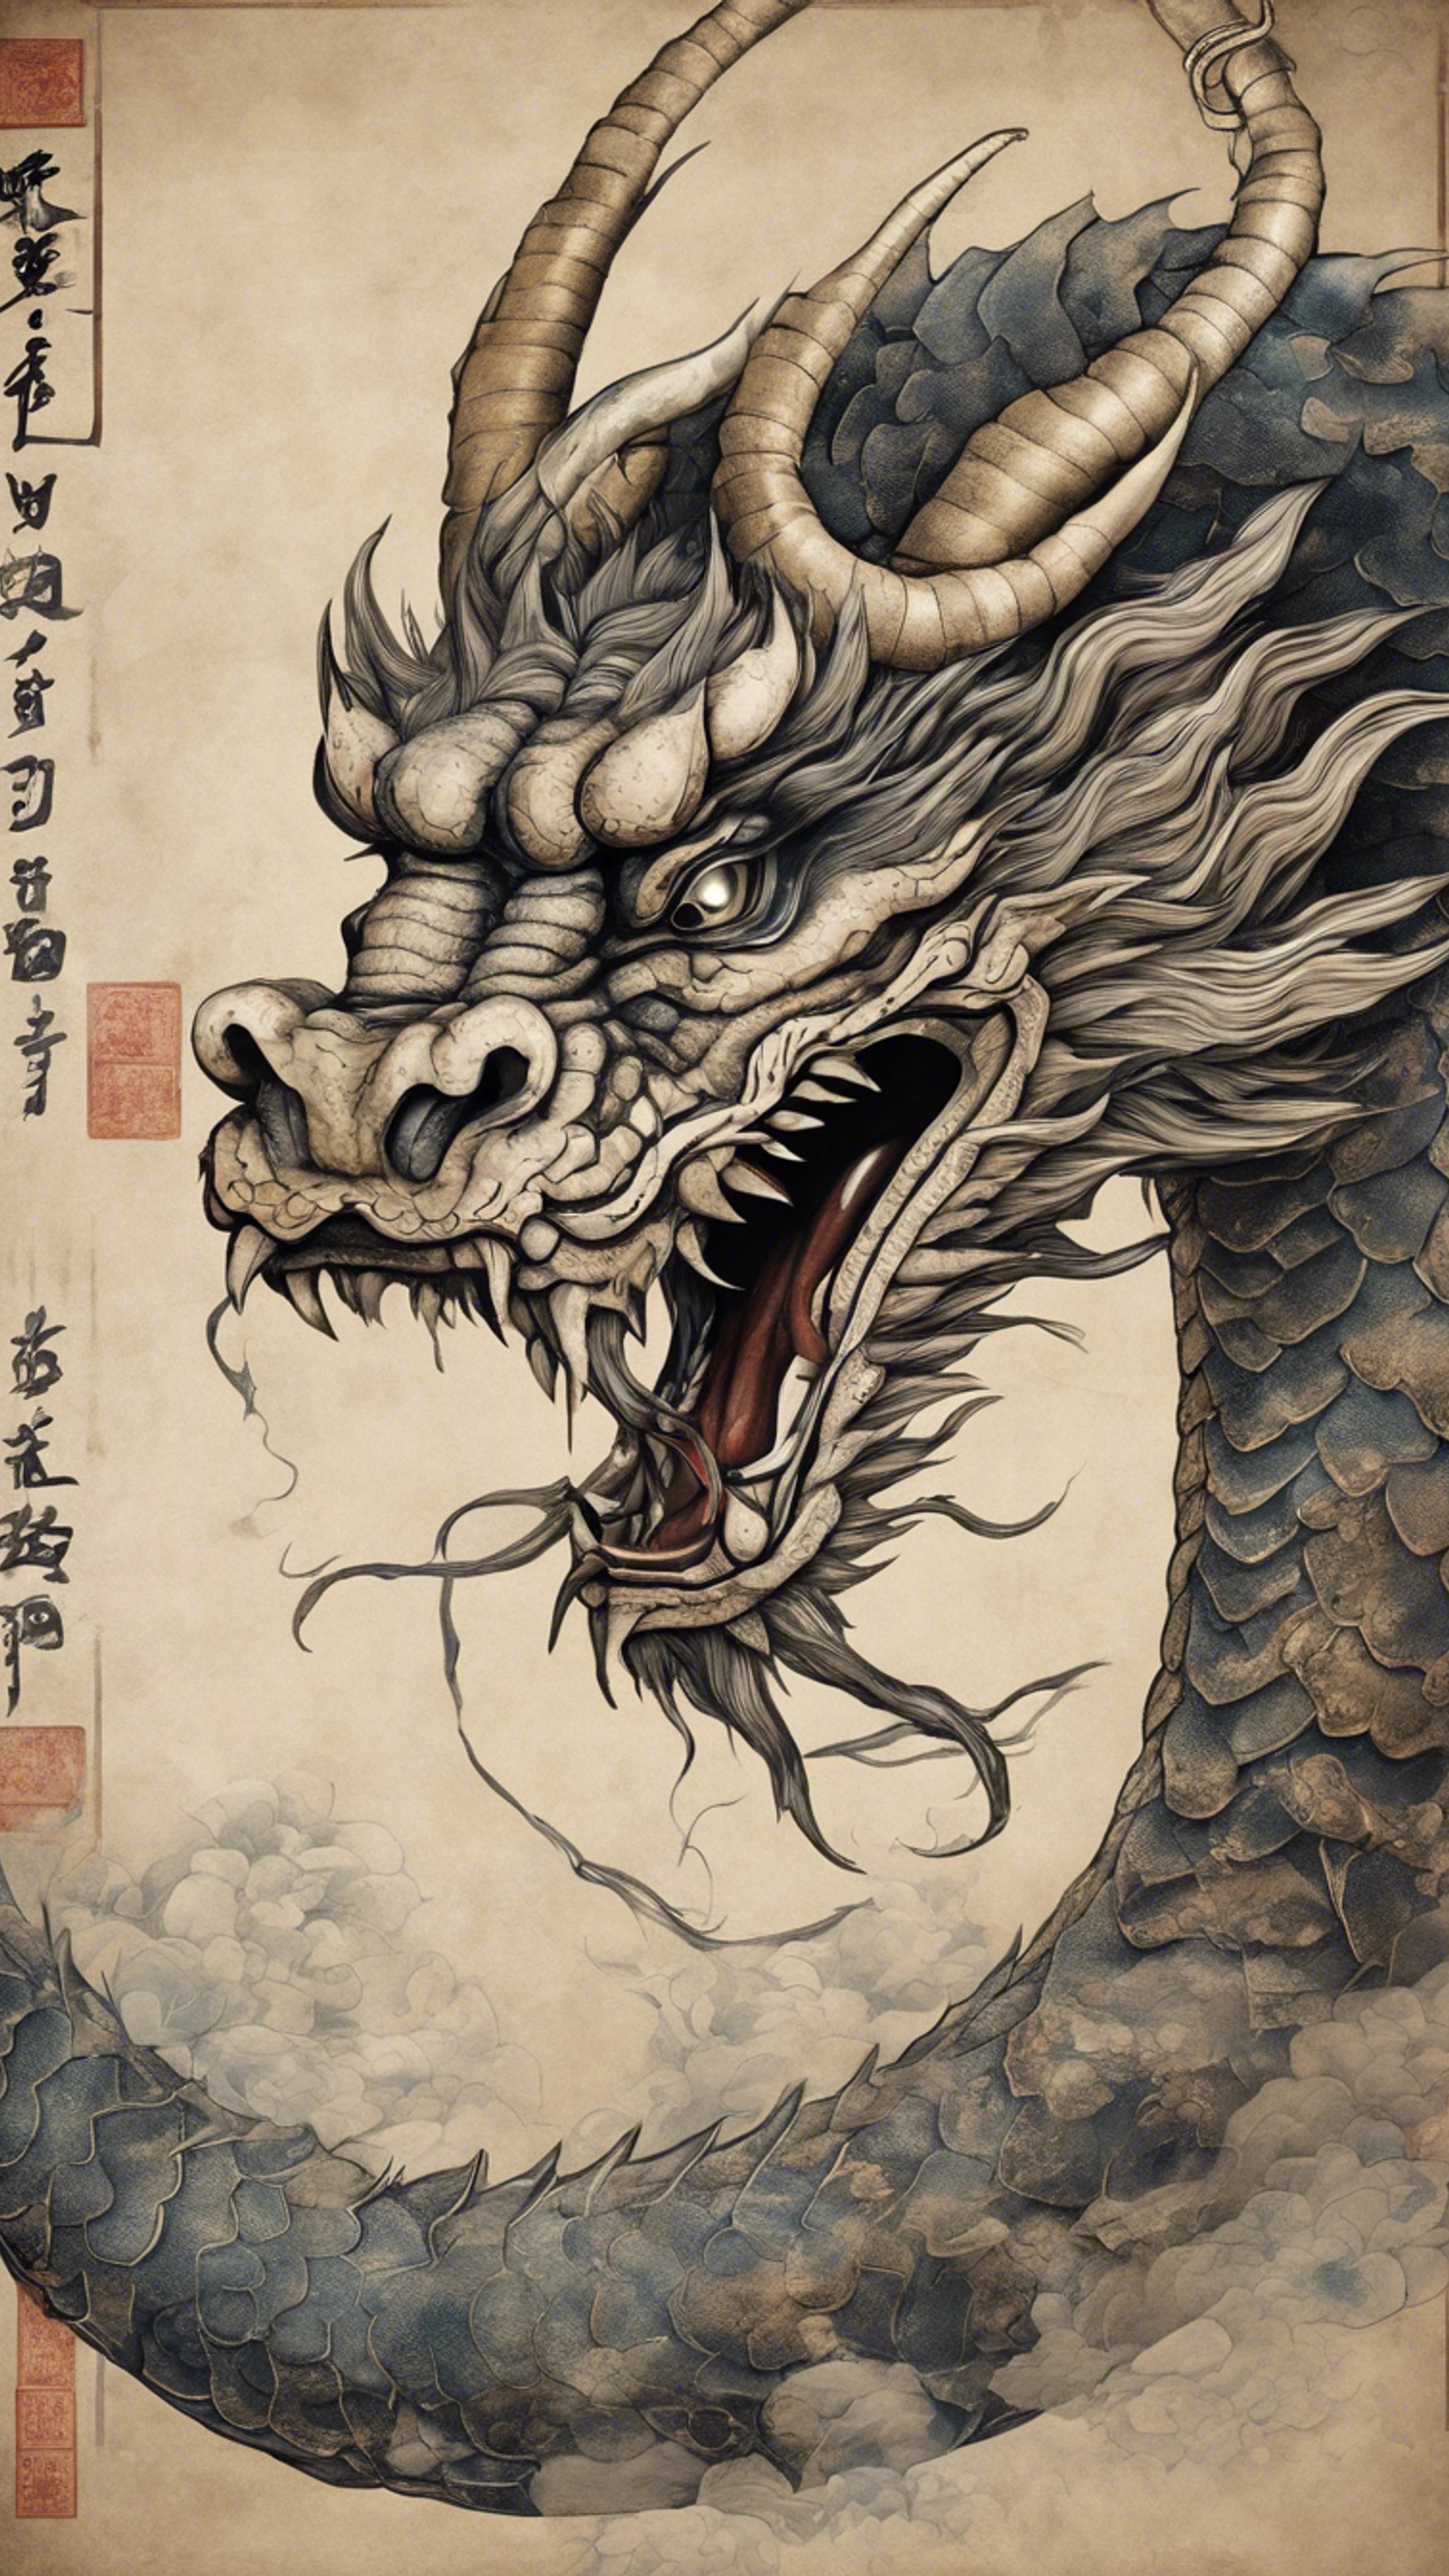 A majestic Japanese dragon illustrated in an ancient scroll. Tapet[ee61e4c394914154b9e3]